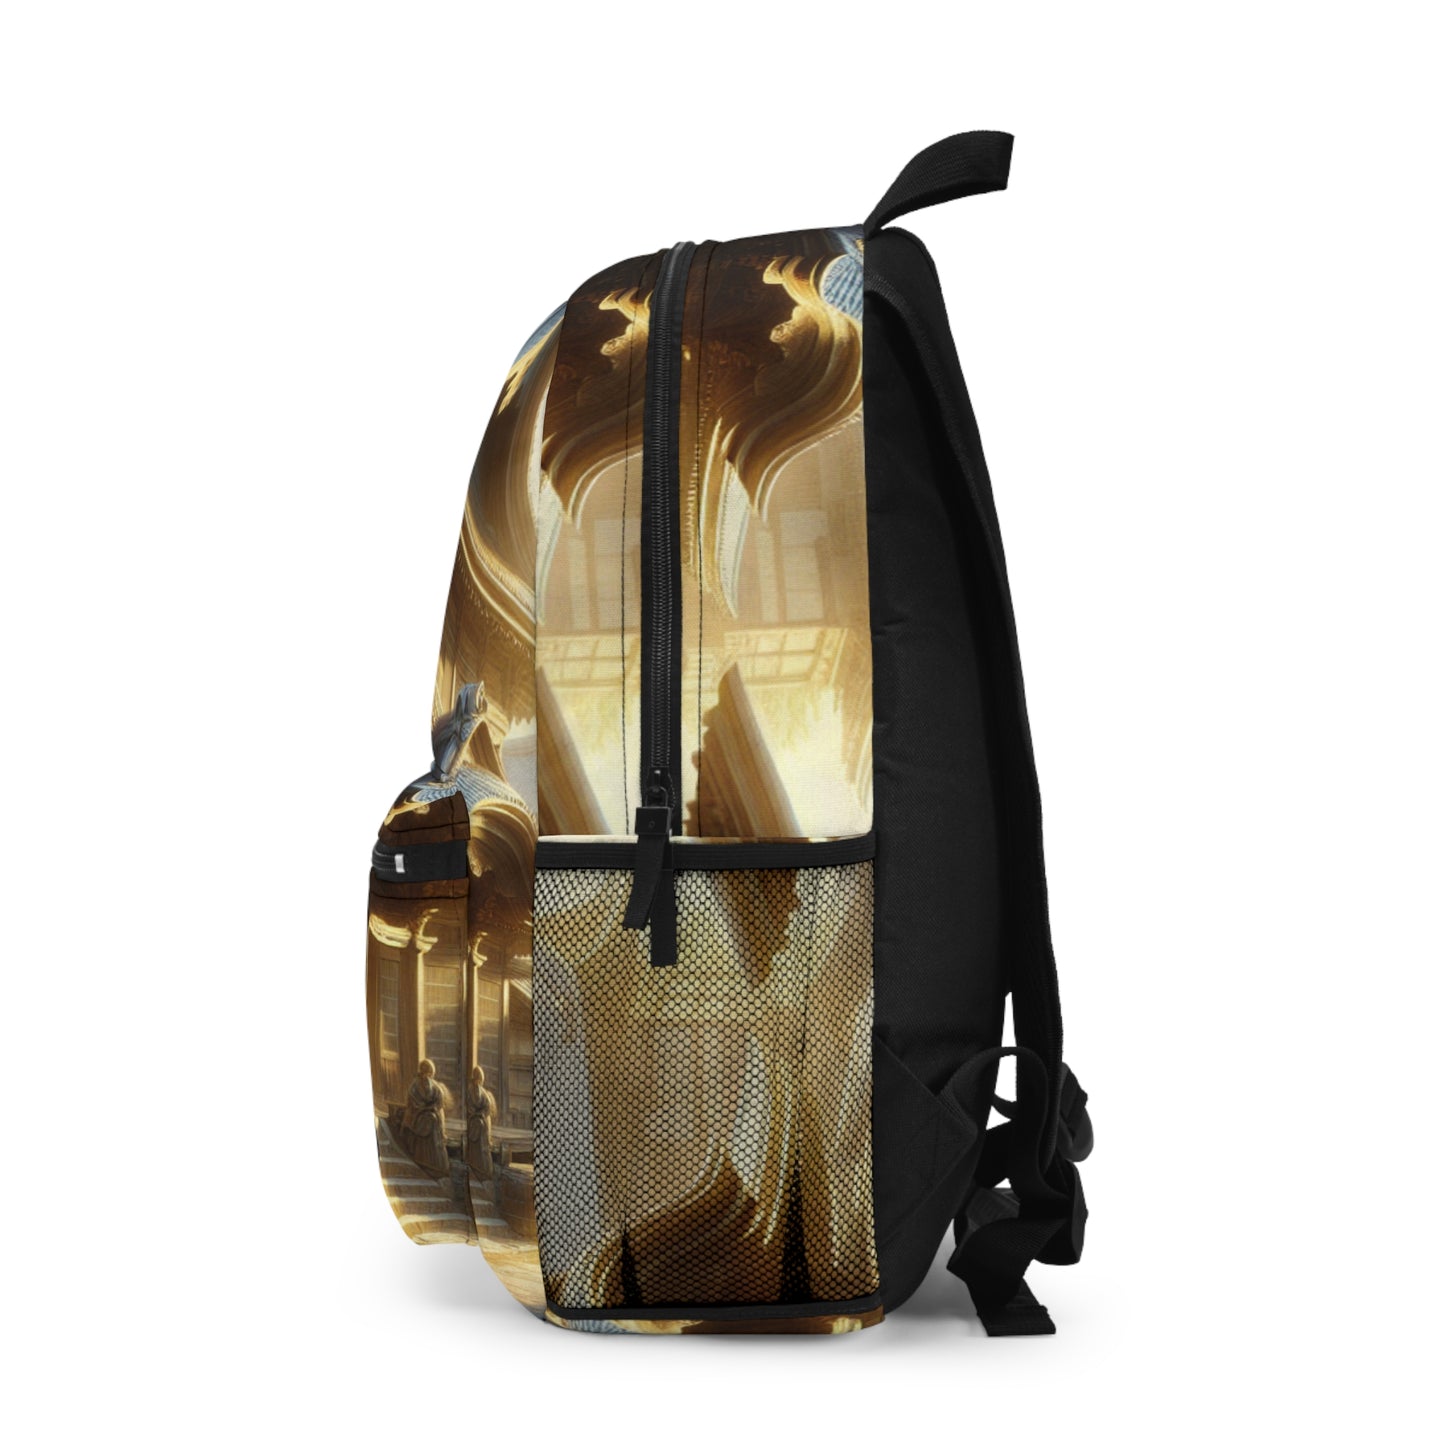 "Golden Hour Bliss: Photographic Realism Landscape" - The Alien Backpack Photographic Realism